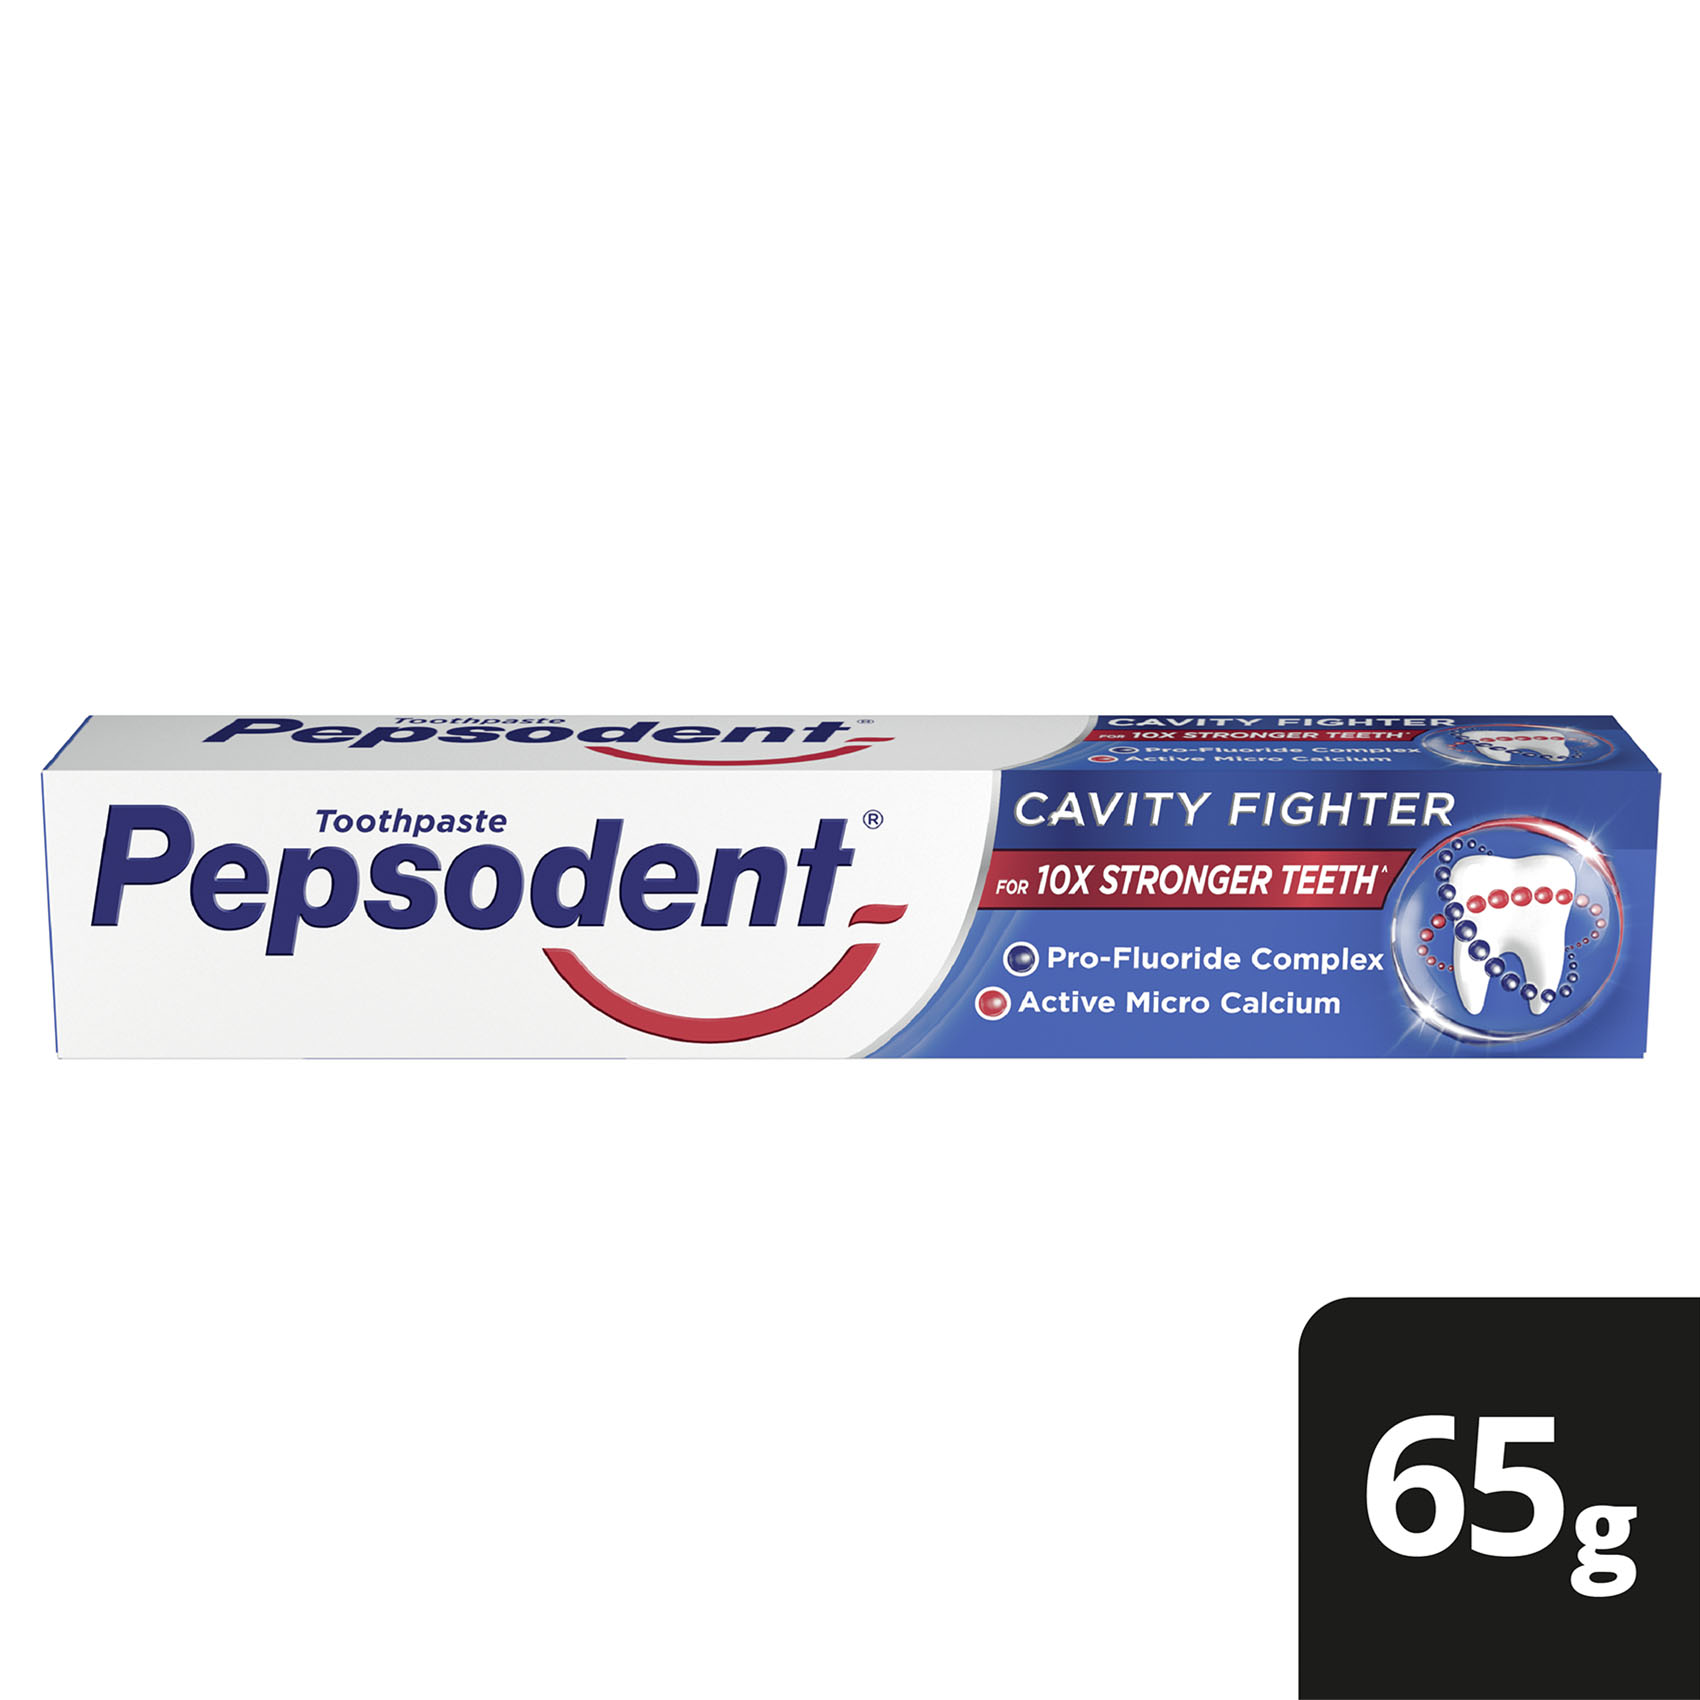 Pepsodent Cavity Fighter Toothpaste 65g